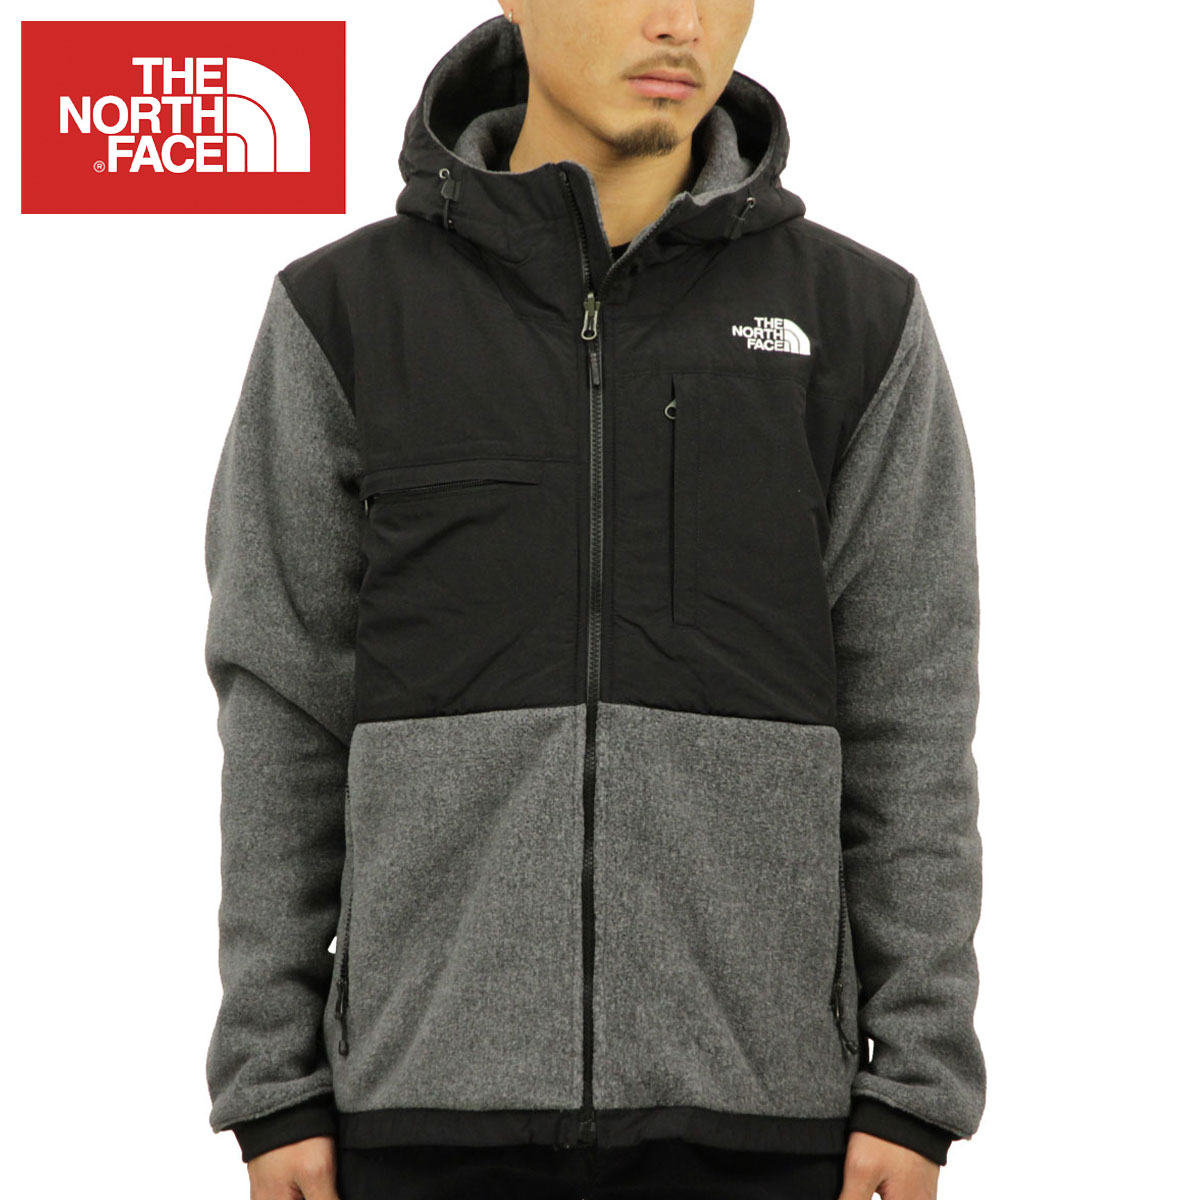 15%OFFクーポンセール  ノースフェイス ジャケット メンズ 正規品 THE NORTH FACE アウターフリースジャケット DENALI 2 FLEECE HOODIE JACKET RECYCLED CHARCOAL GREY HEATHER / TNF BLACK NF0A2TBN MA9 父の日 プレゼント ラッピング